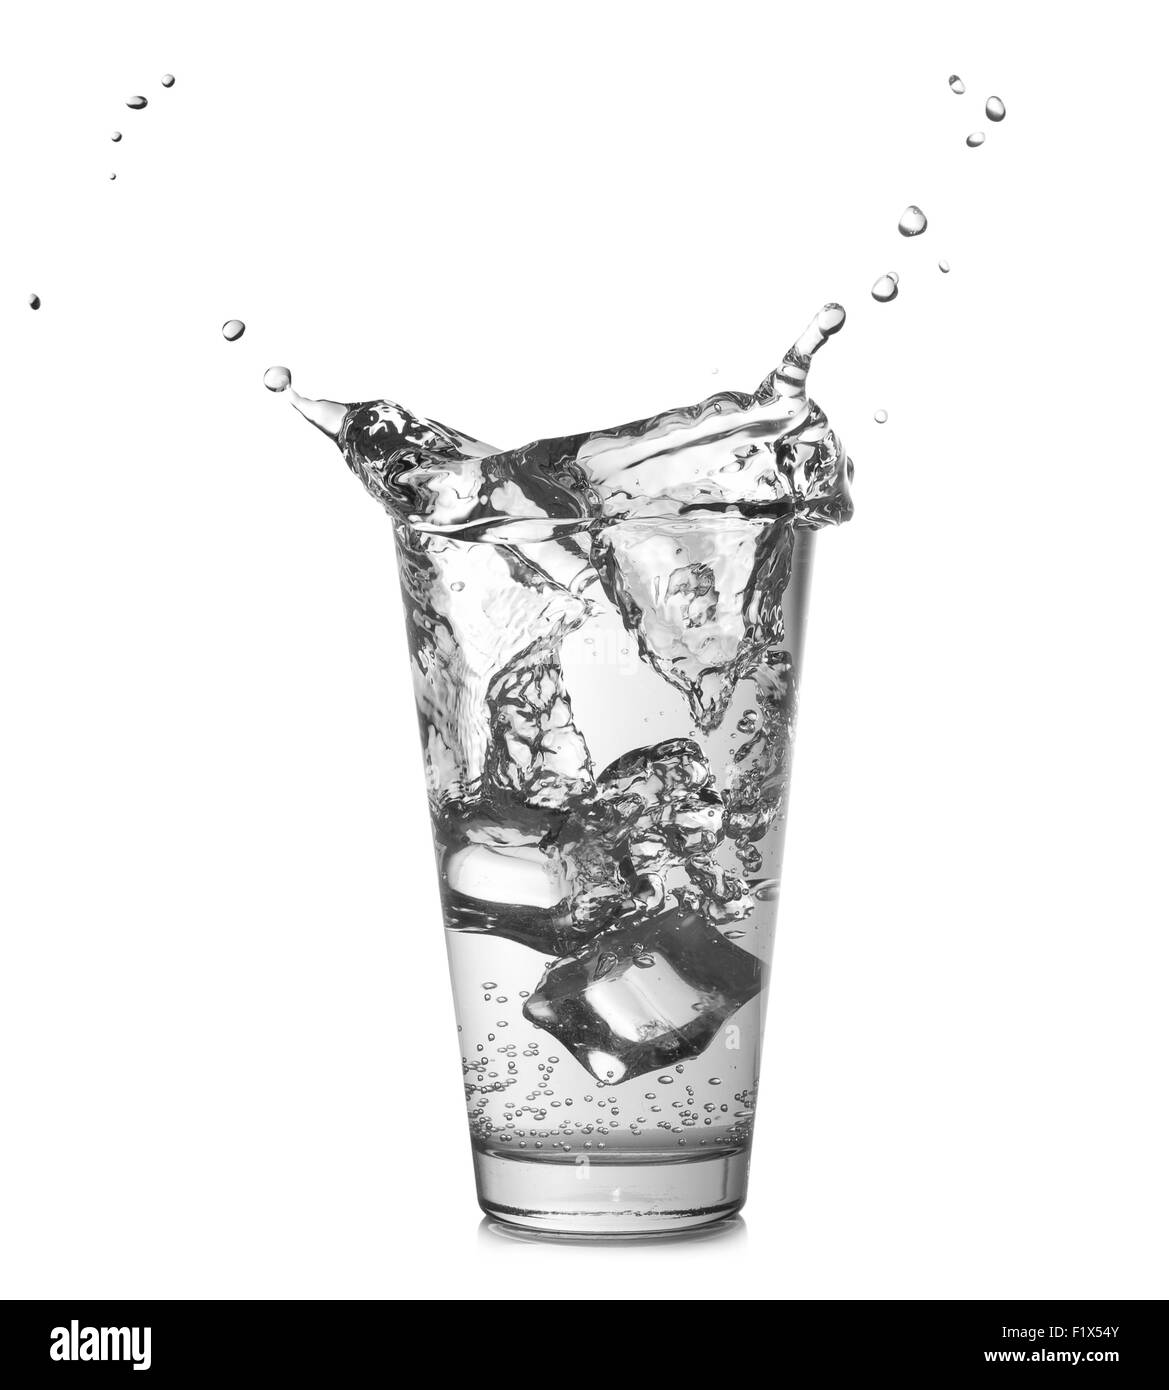 https://c8.alamy.com/comp/F1X54Y/falling-ice-in-glass-of-water-on-the-white-background-F1X54Y.jpg